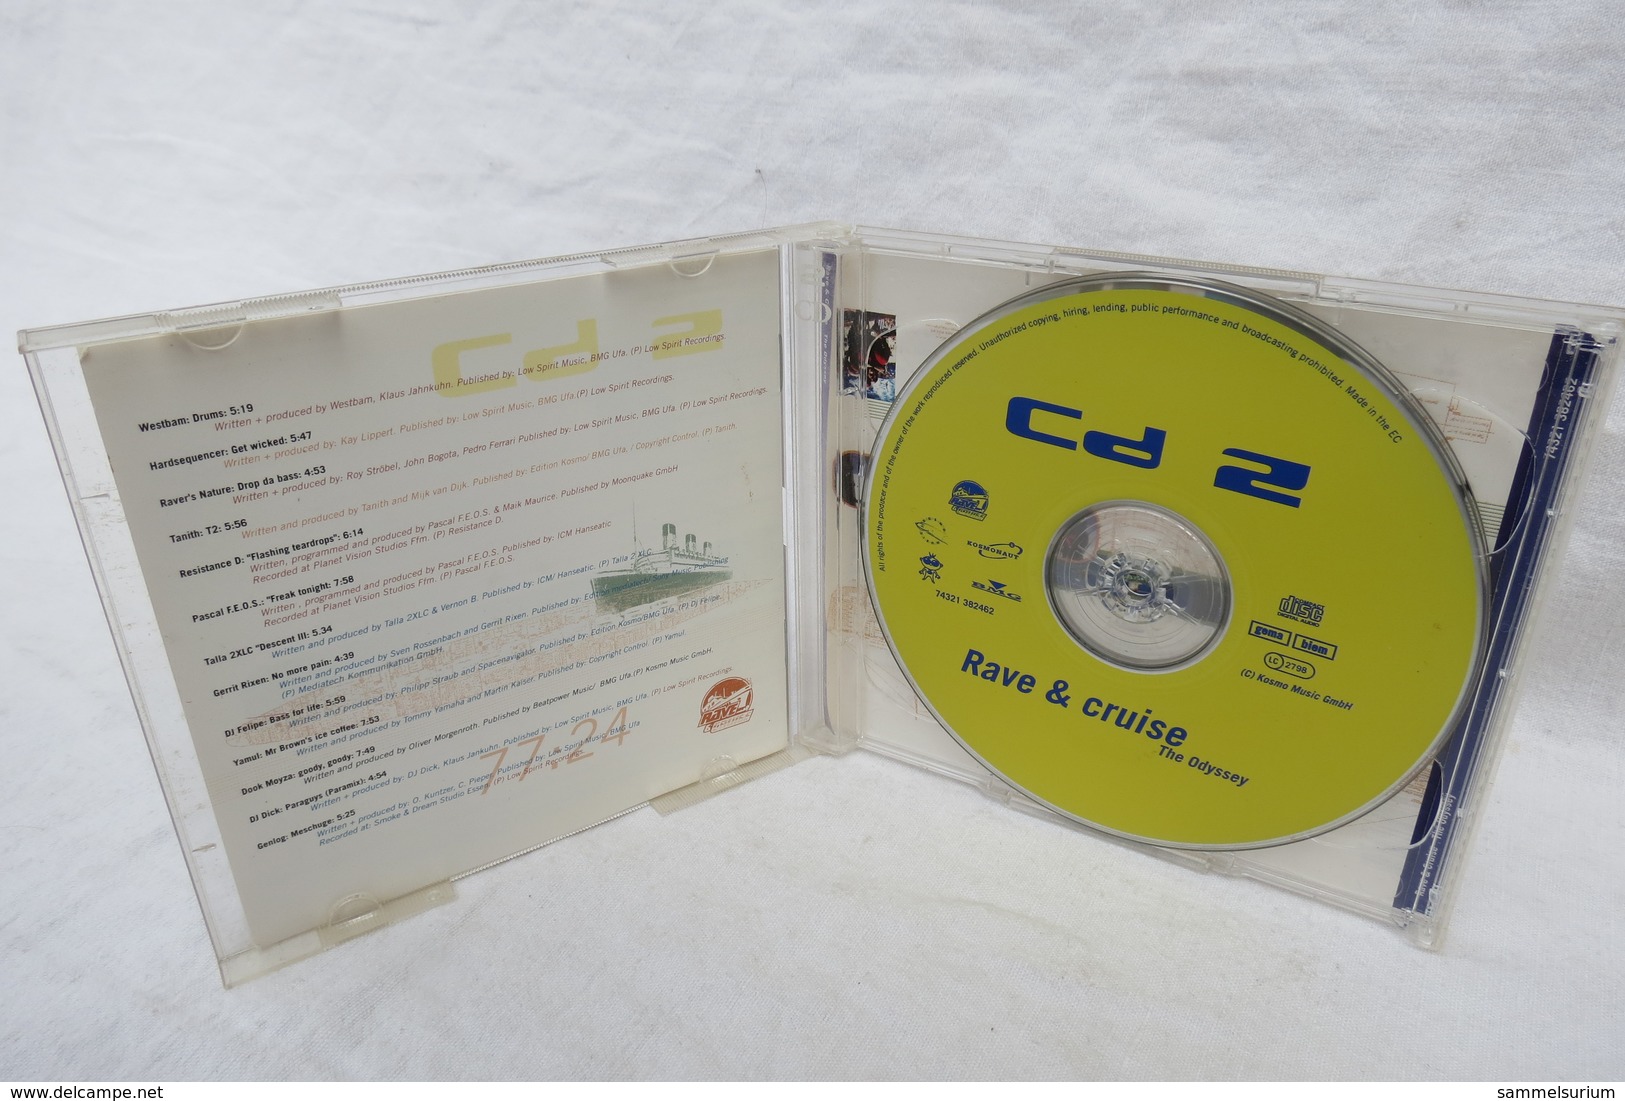 CD "Rave & Cruise" The Odyssey - Dance, Techno & House